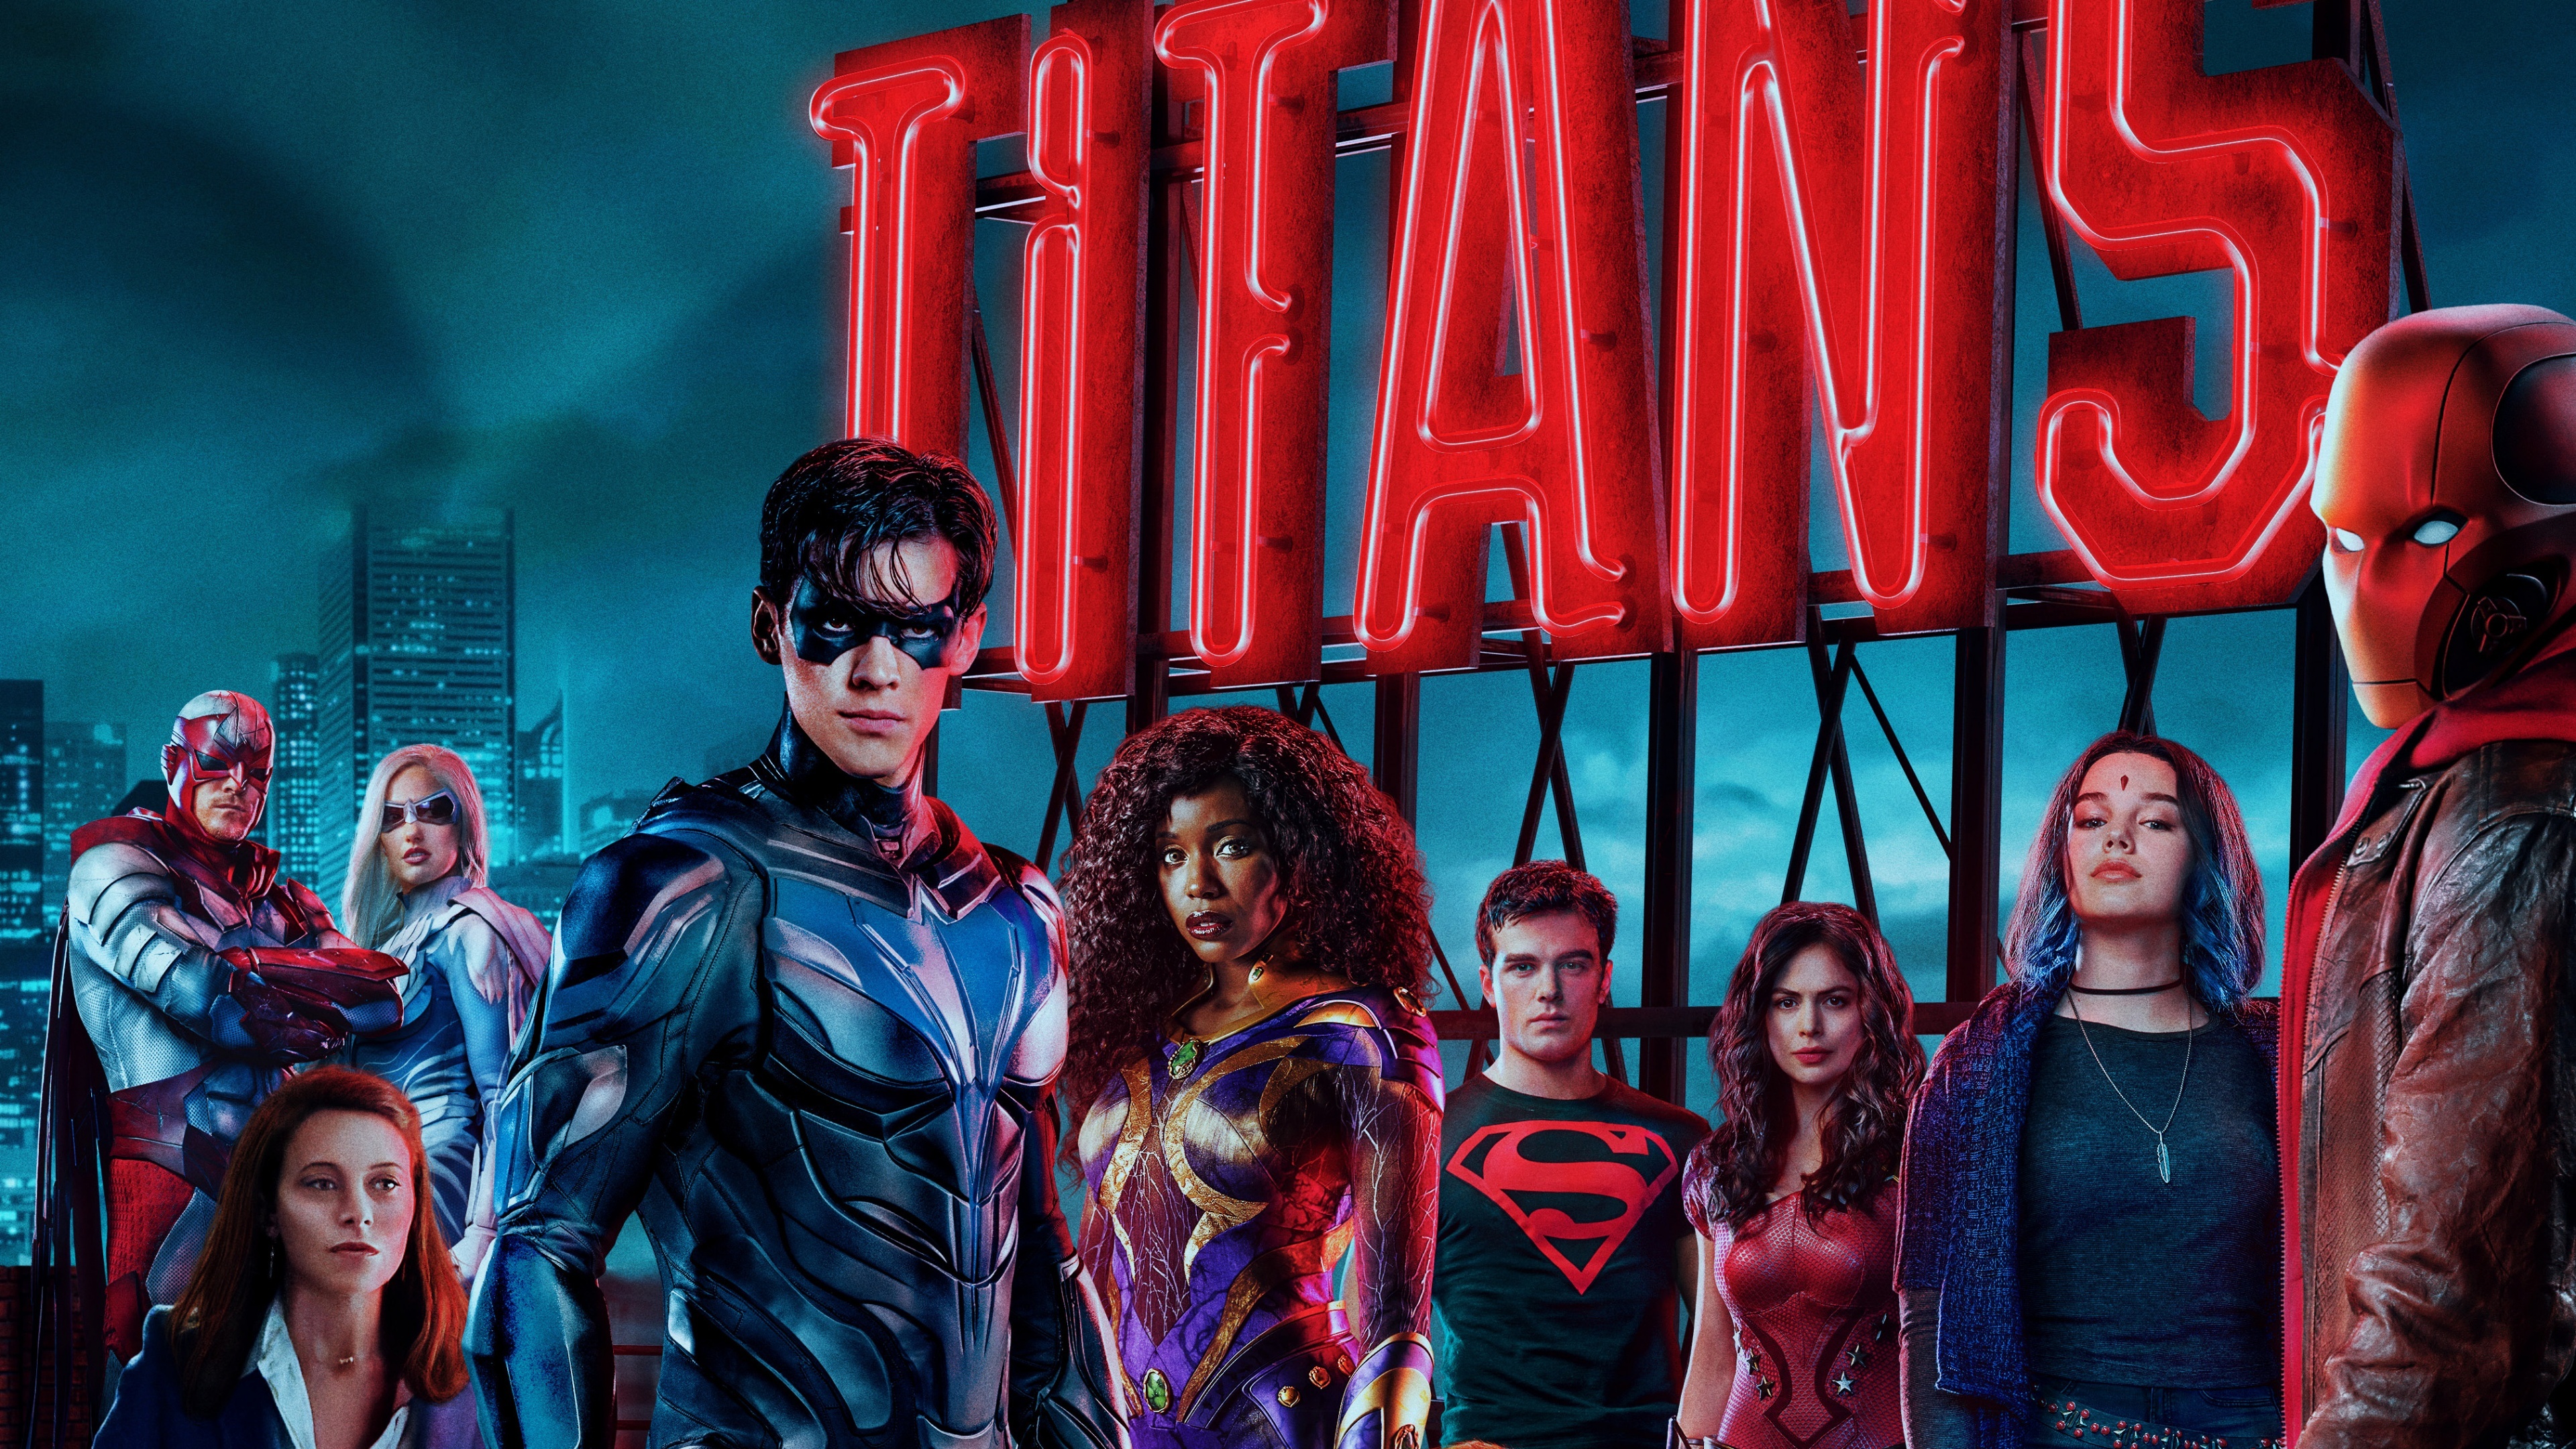 Titans TV series, Wallpapers collection, Visual appeal, Characters and action, 3840x2160 4K Desktop